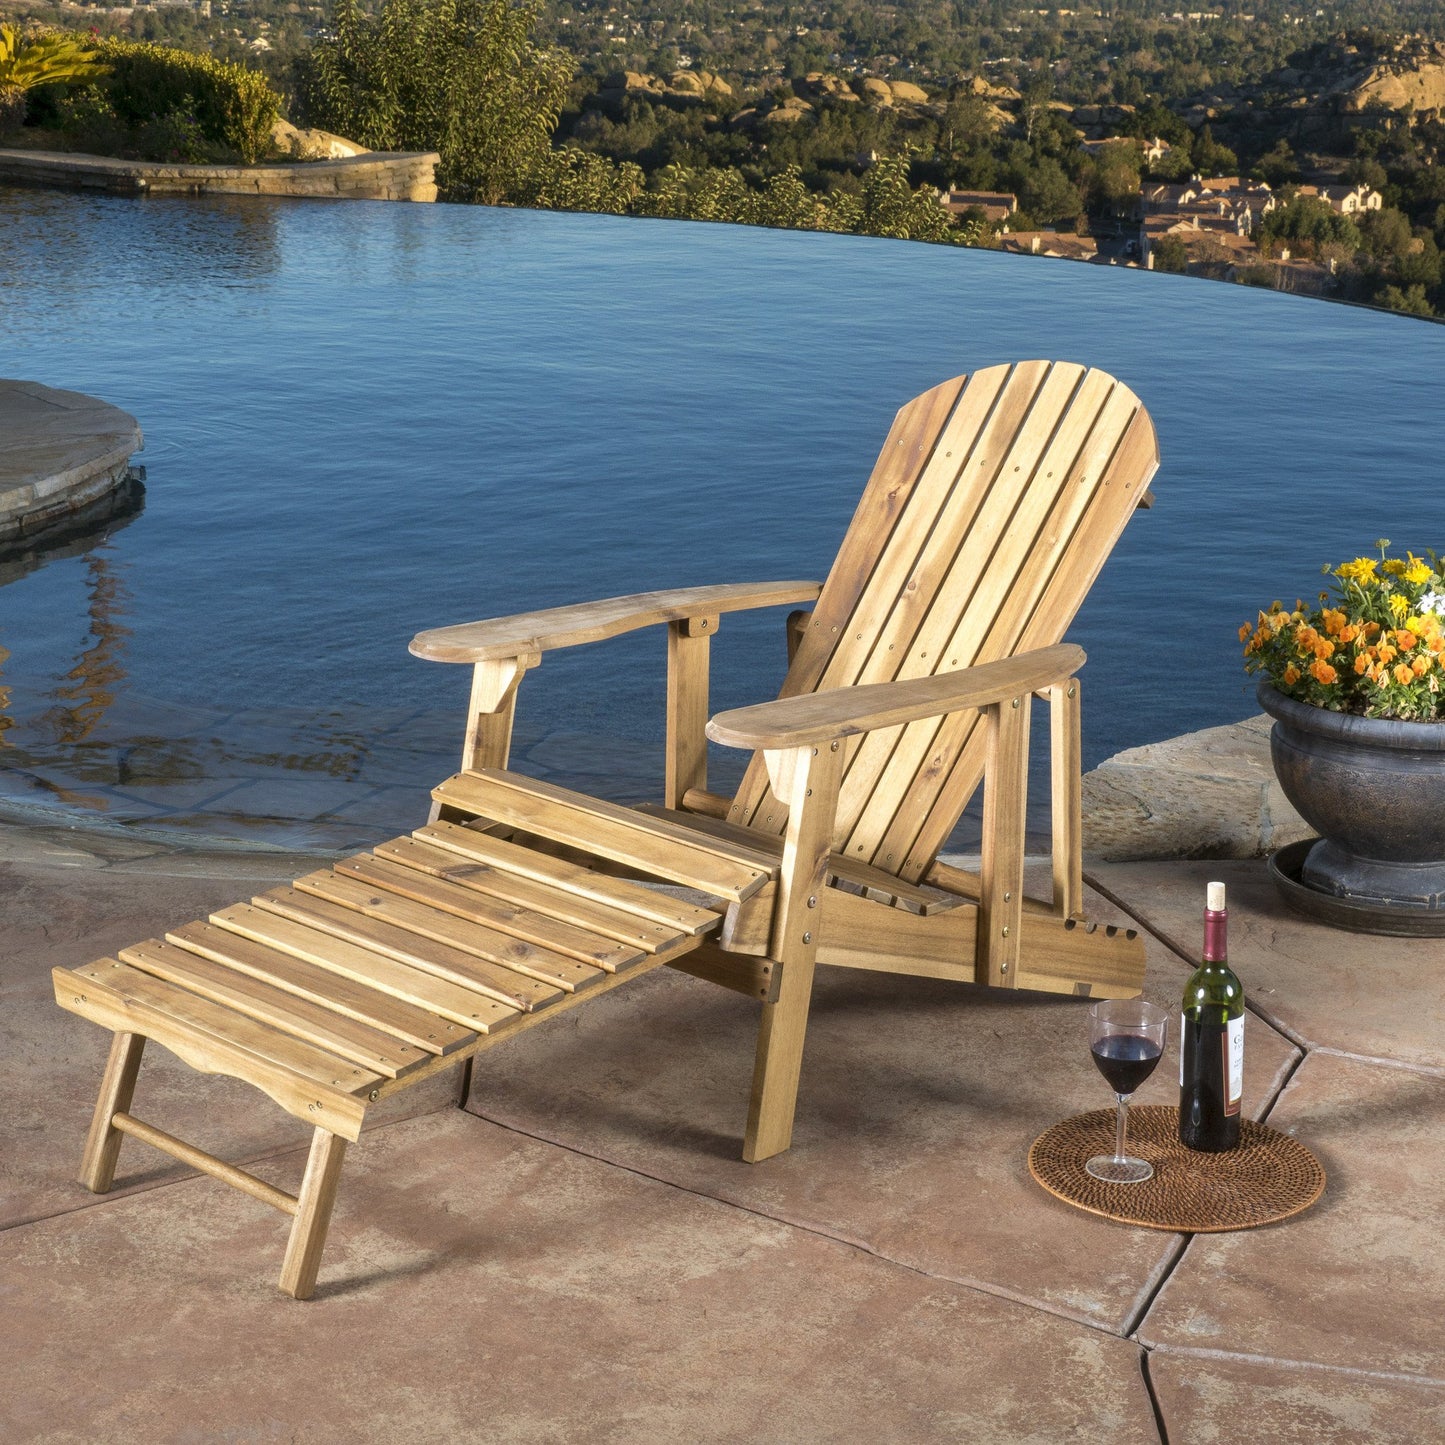 Kono Outdoor Acacia Wood Reclining Adirondack Chair with Footrest (Set of 2), Natural